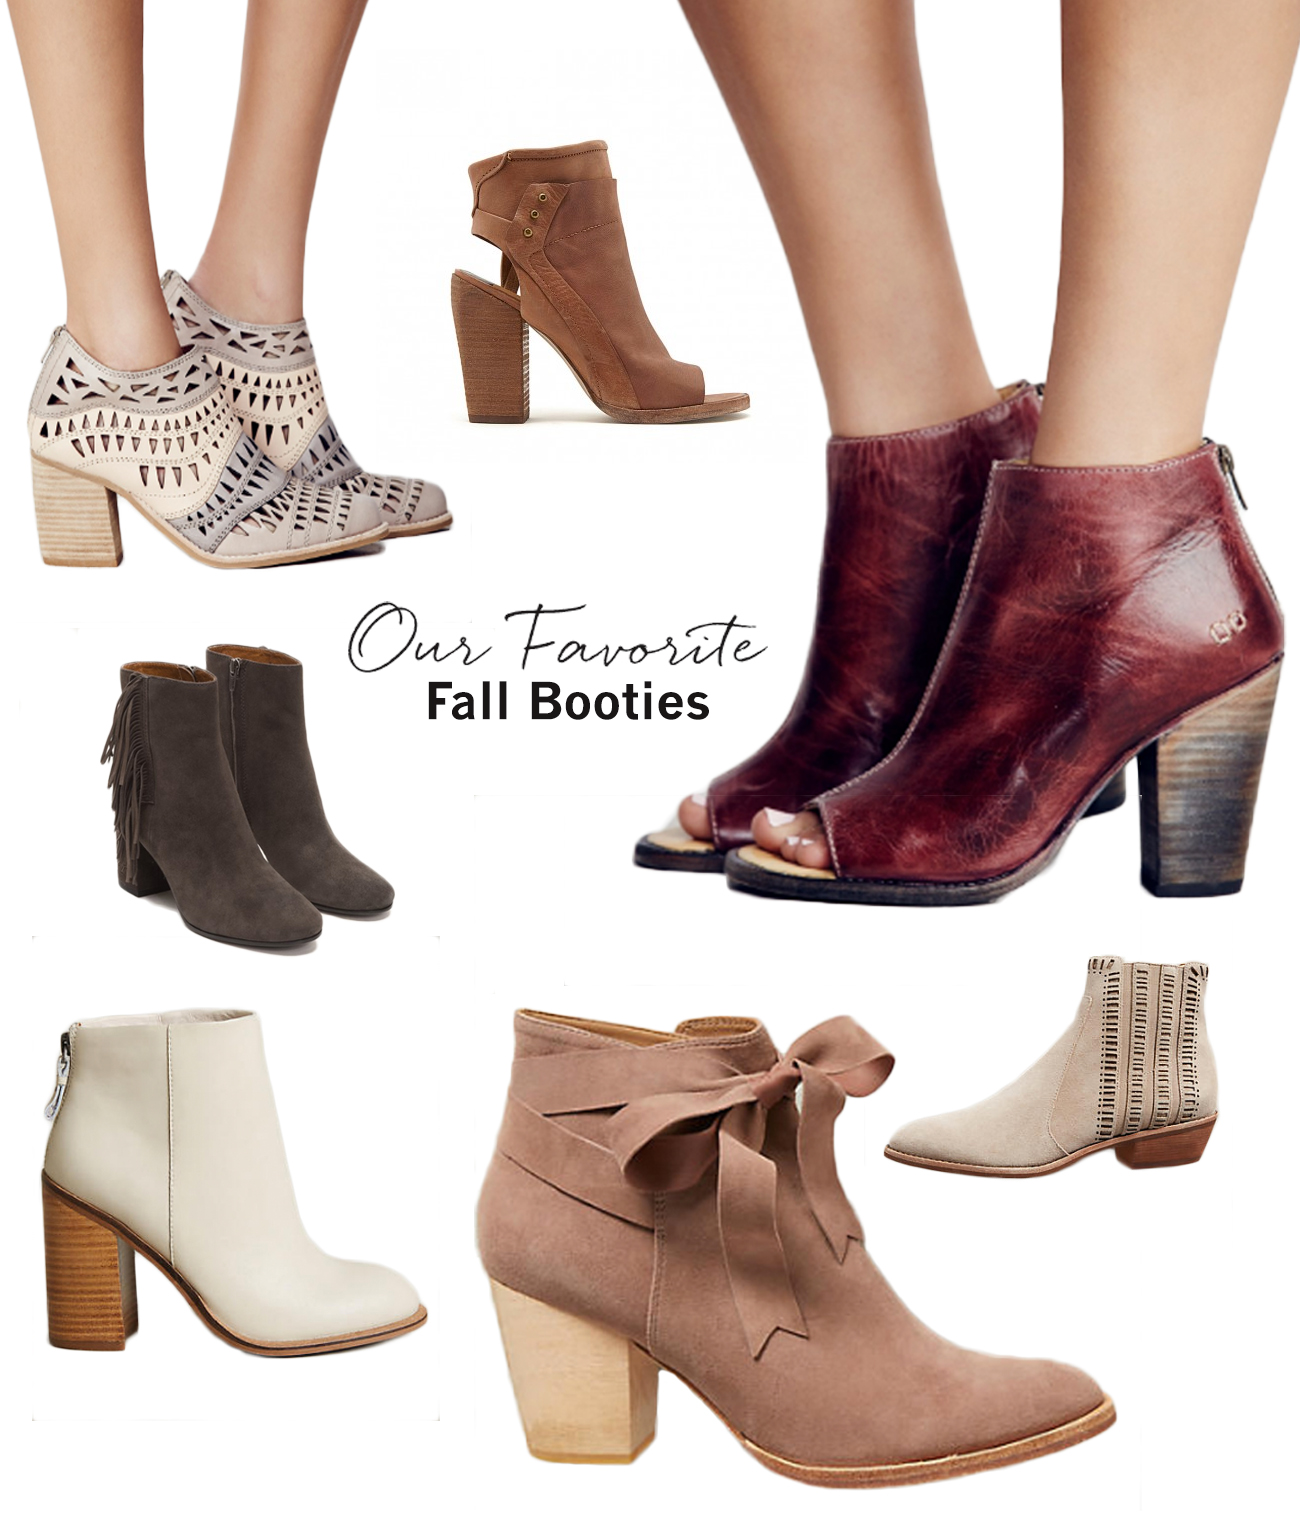 Our Favorite Fall Booties